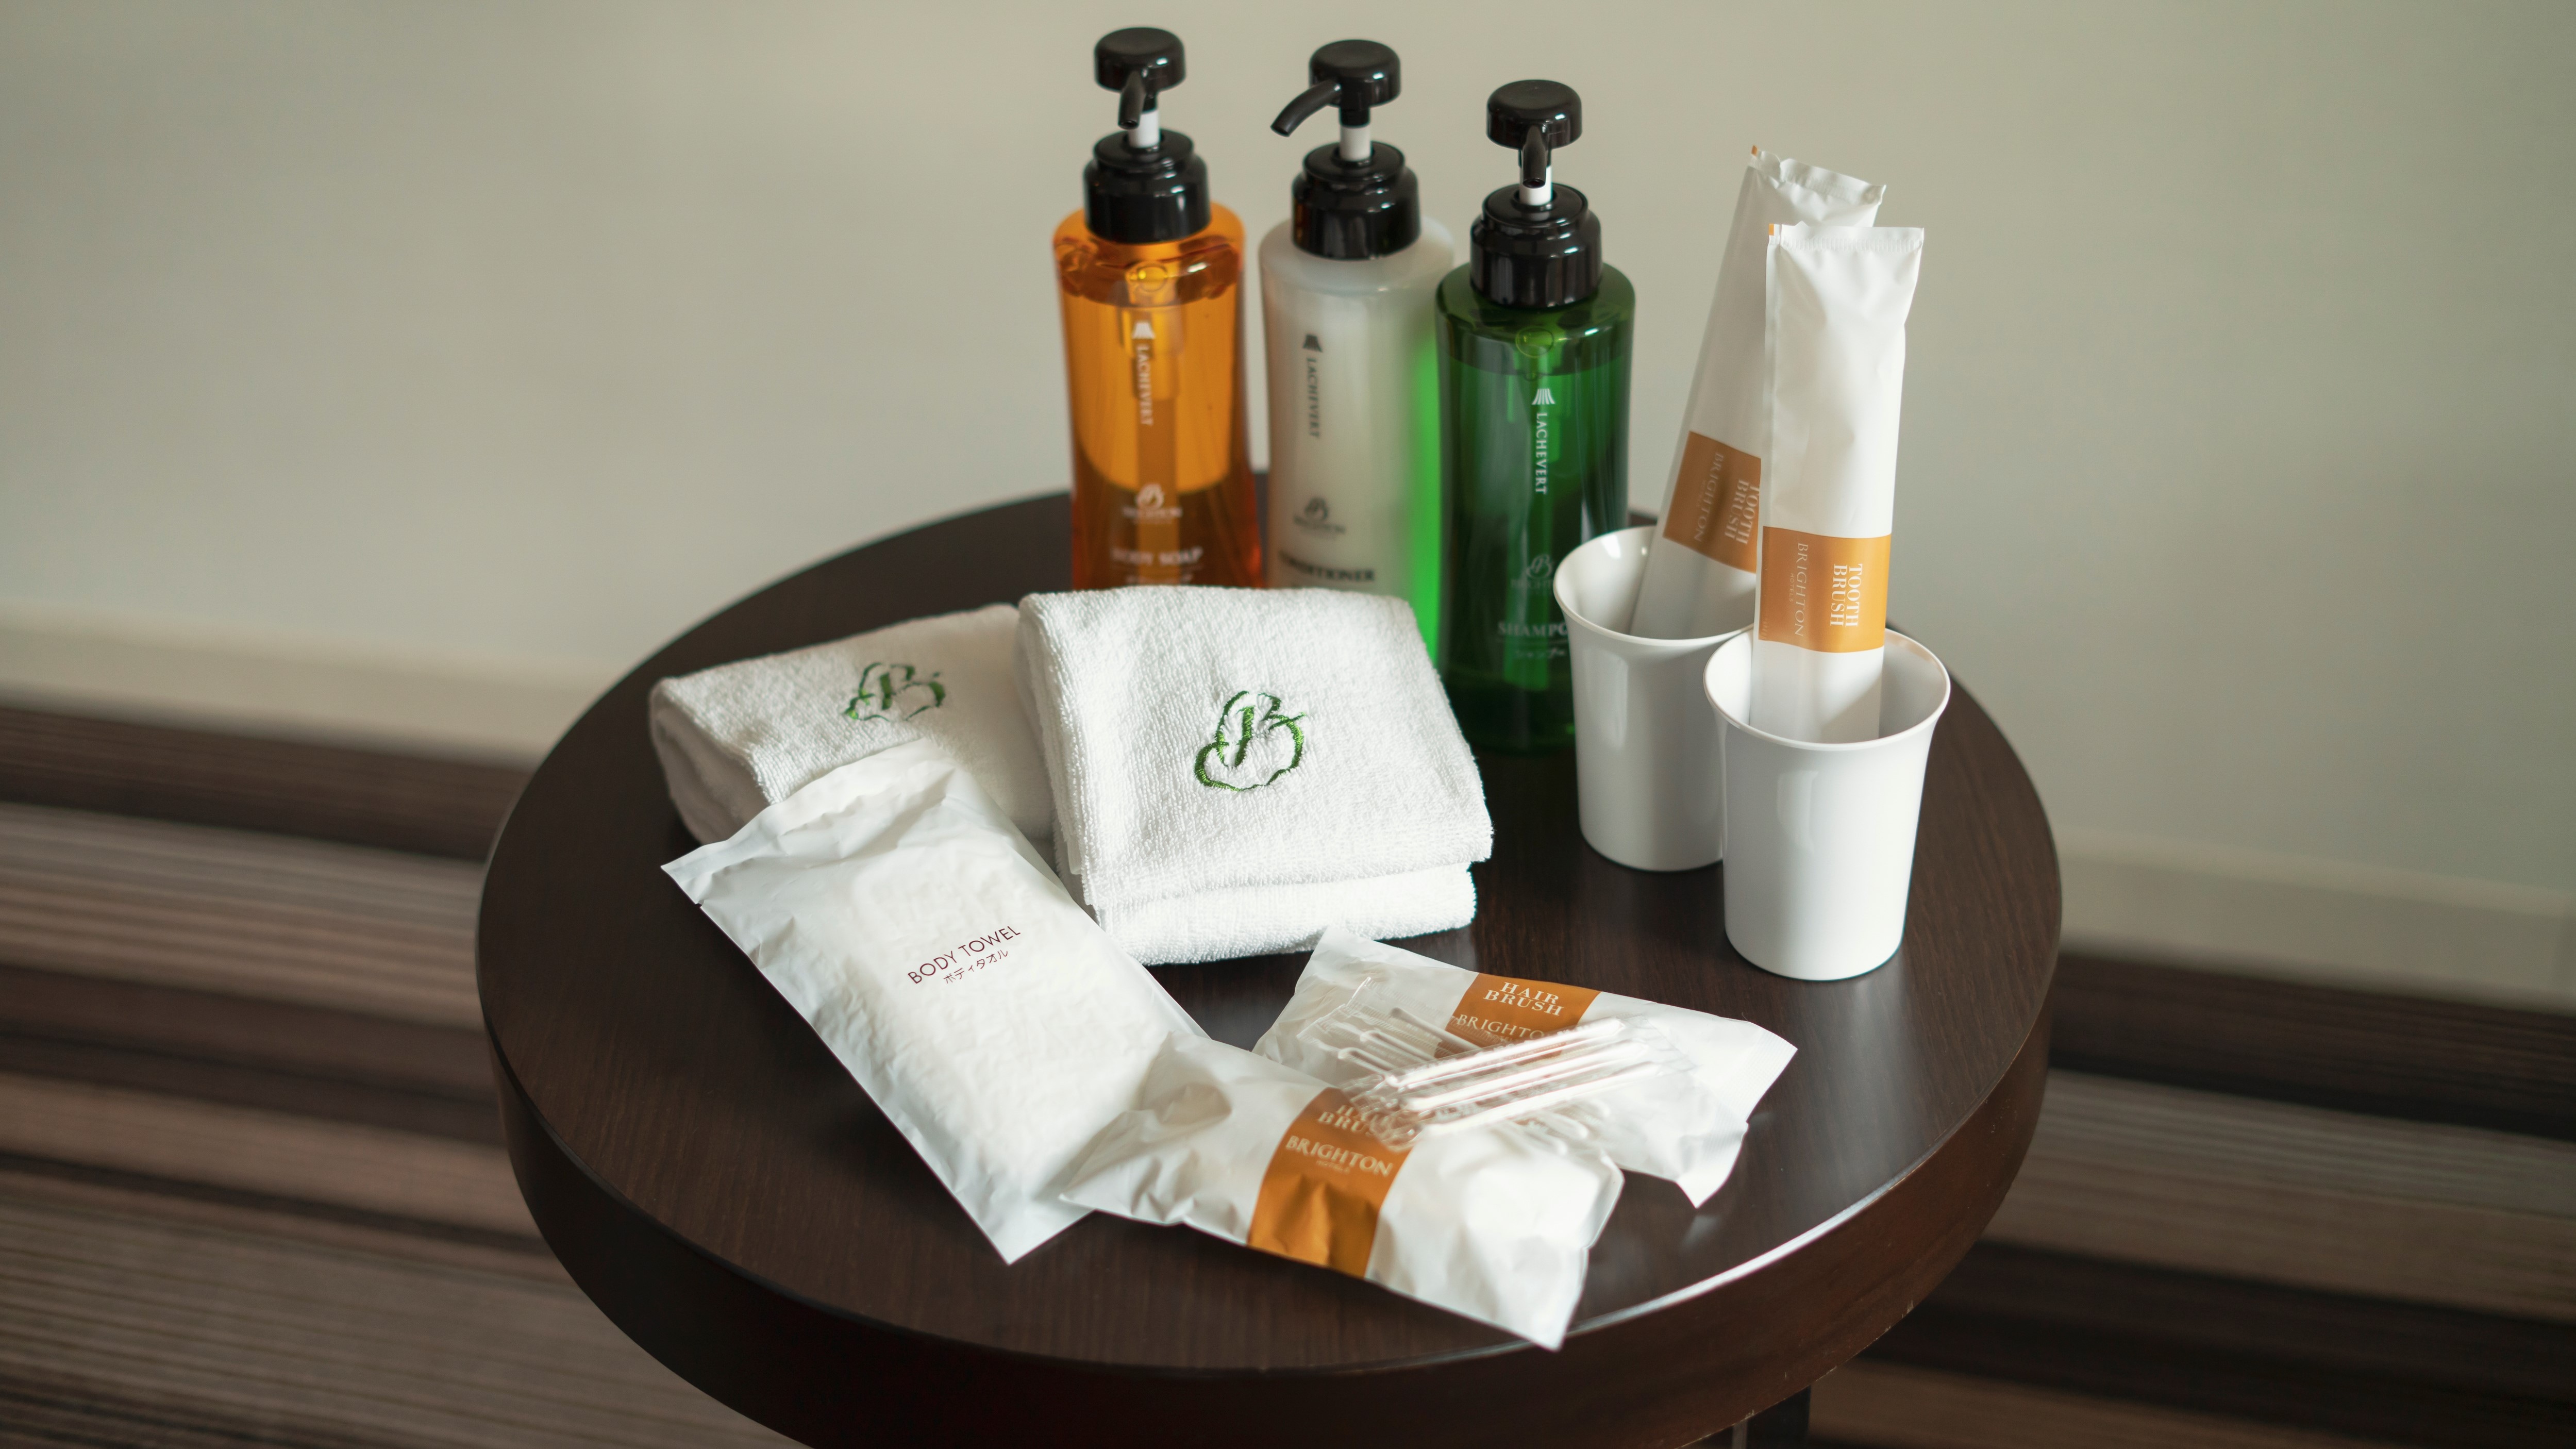 [Common to all types] Bath amenities. Only what you really need, high quality and simple.